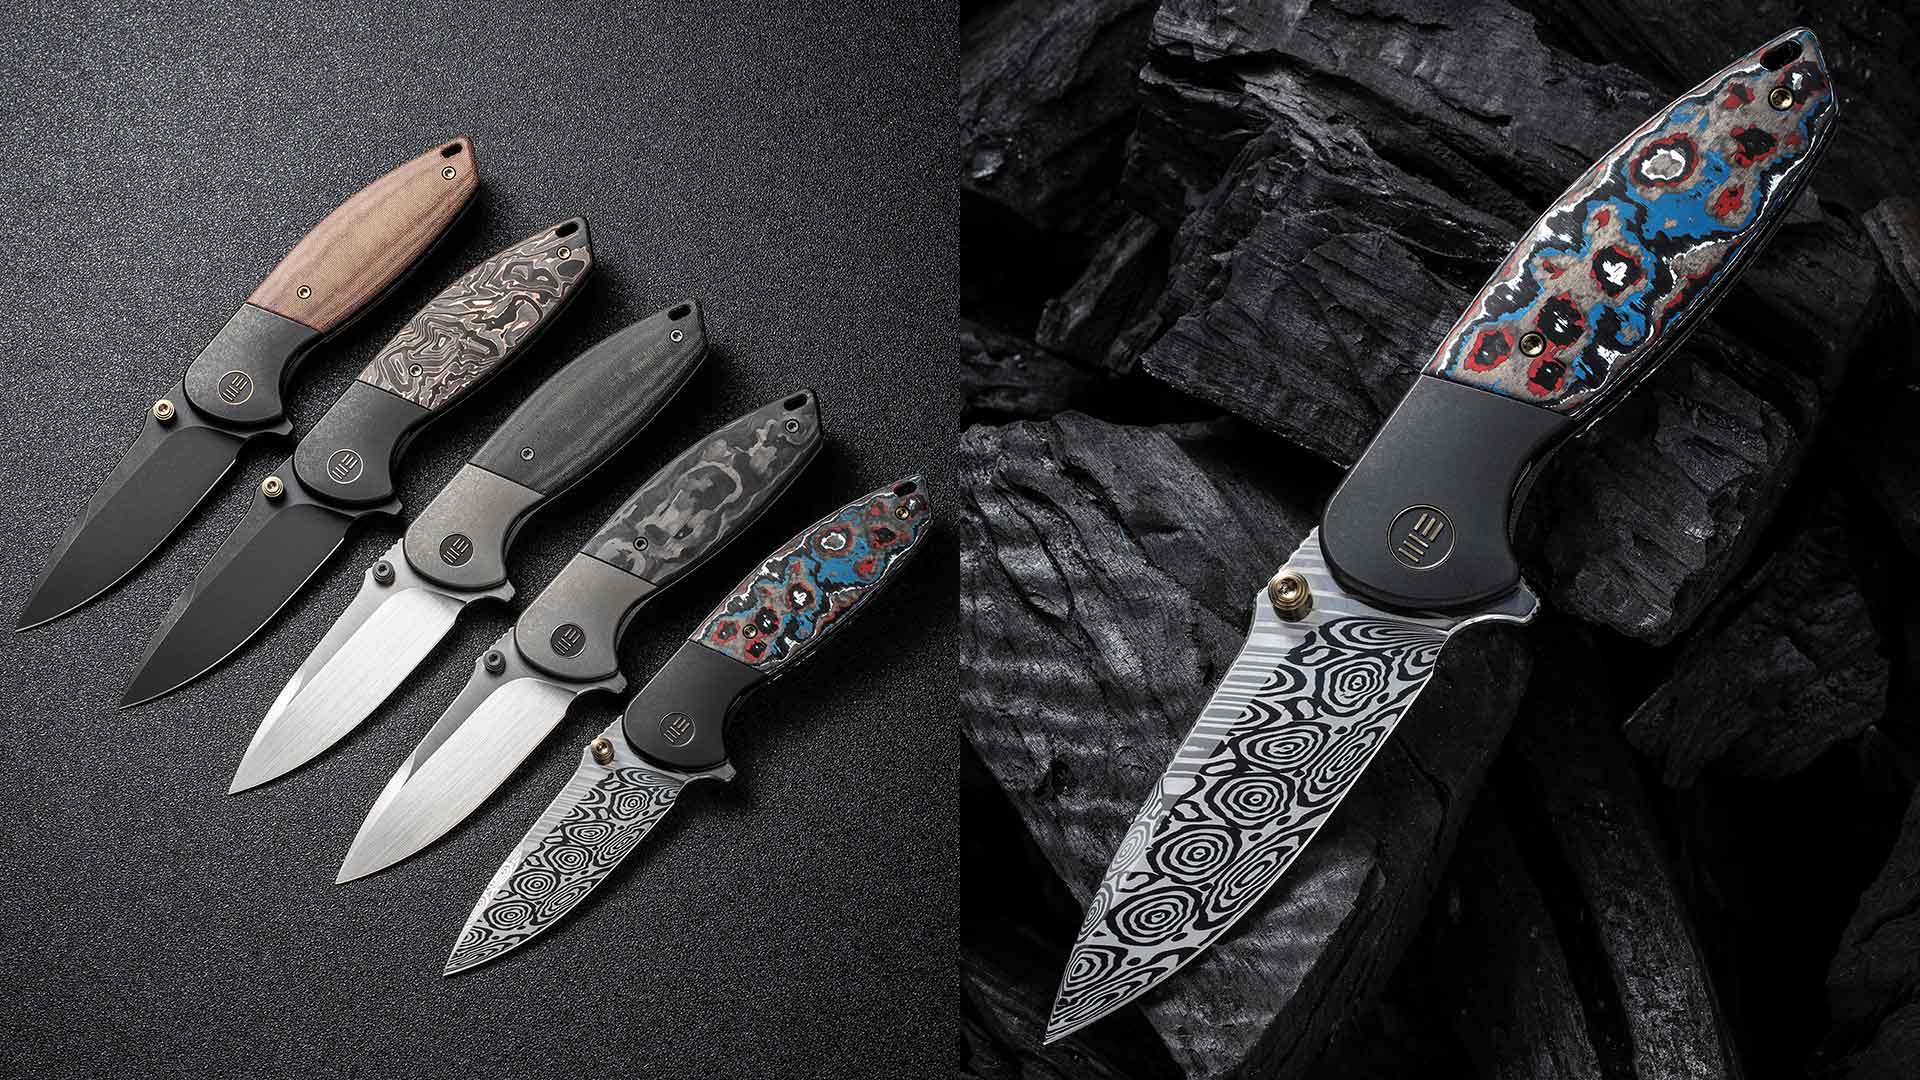 Peter Carey x WE Knife Co. interweave utility, aesthetics and convenience  in Nitro Mini